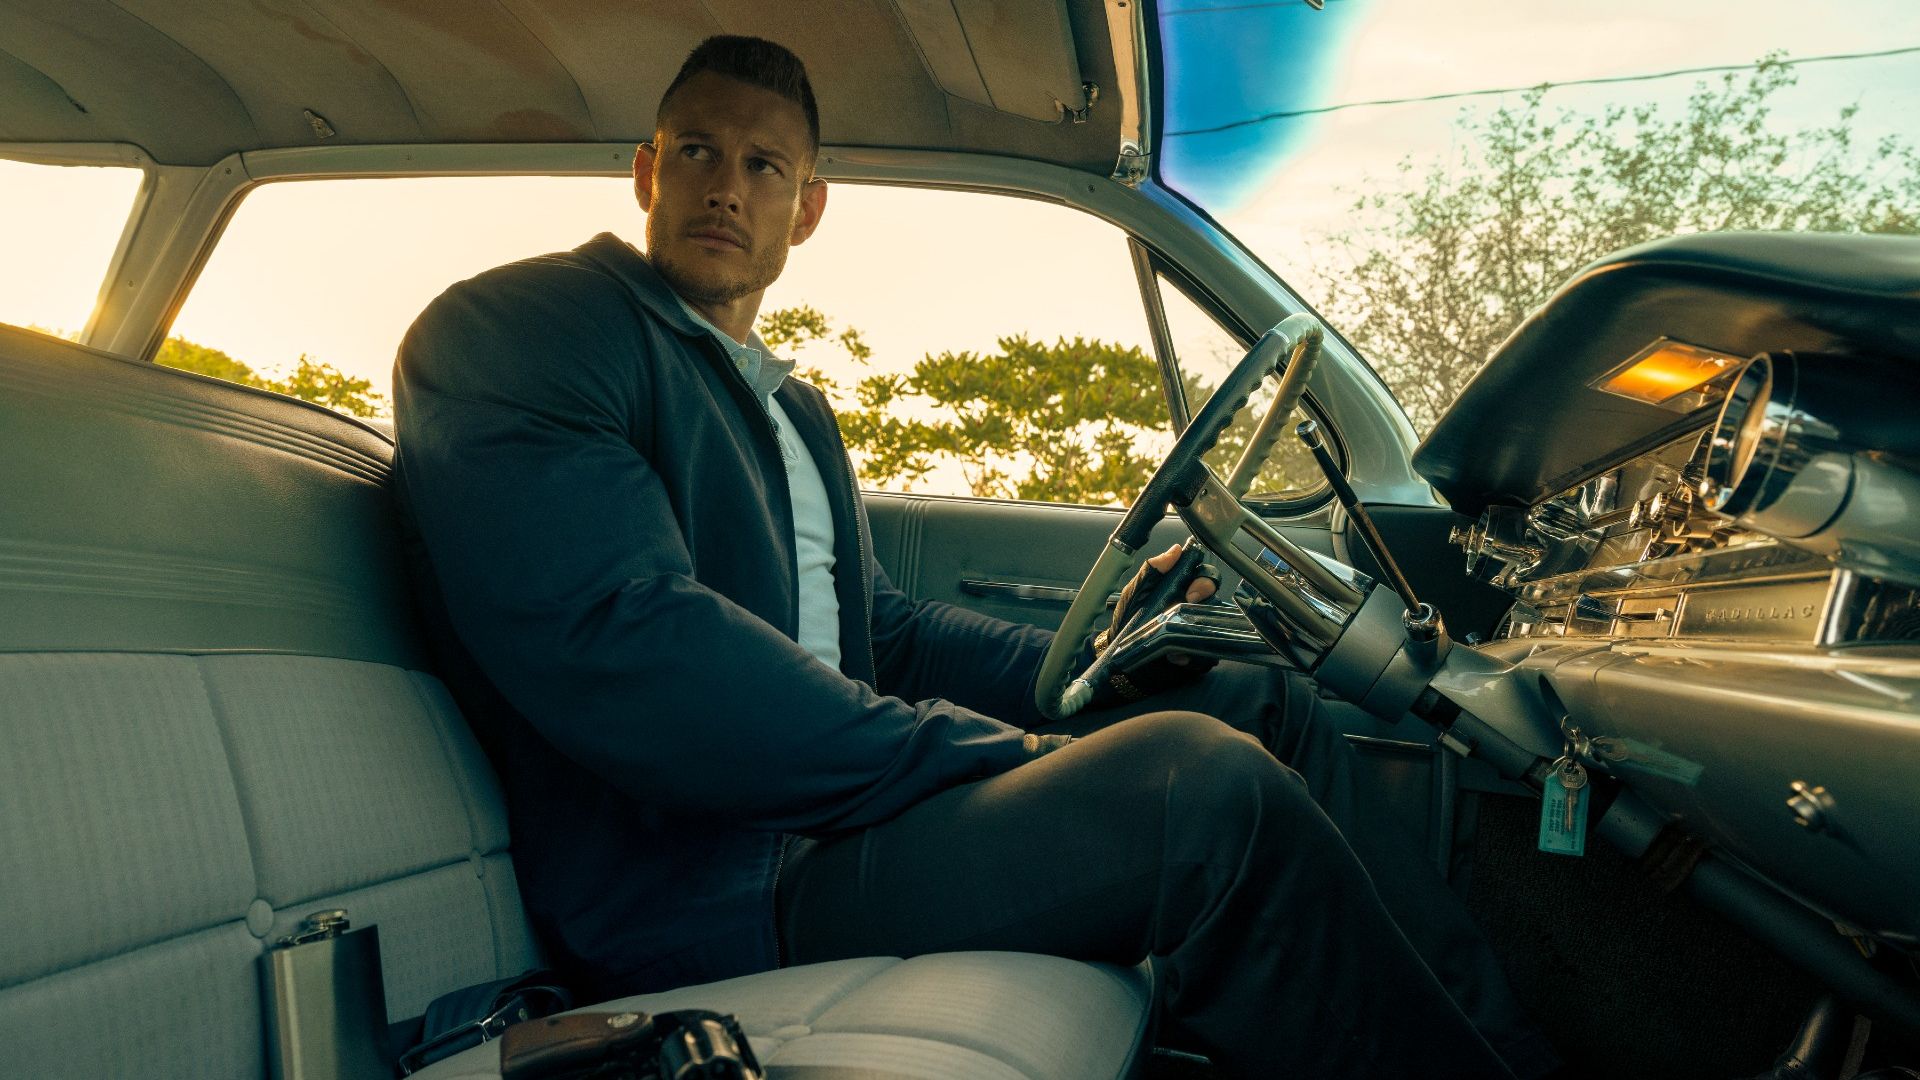 Umbrella Academy: Tom Hopper as Luther Hargreeves